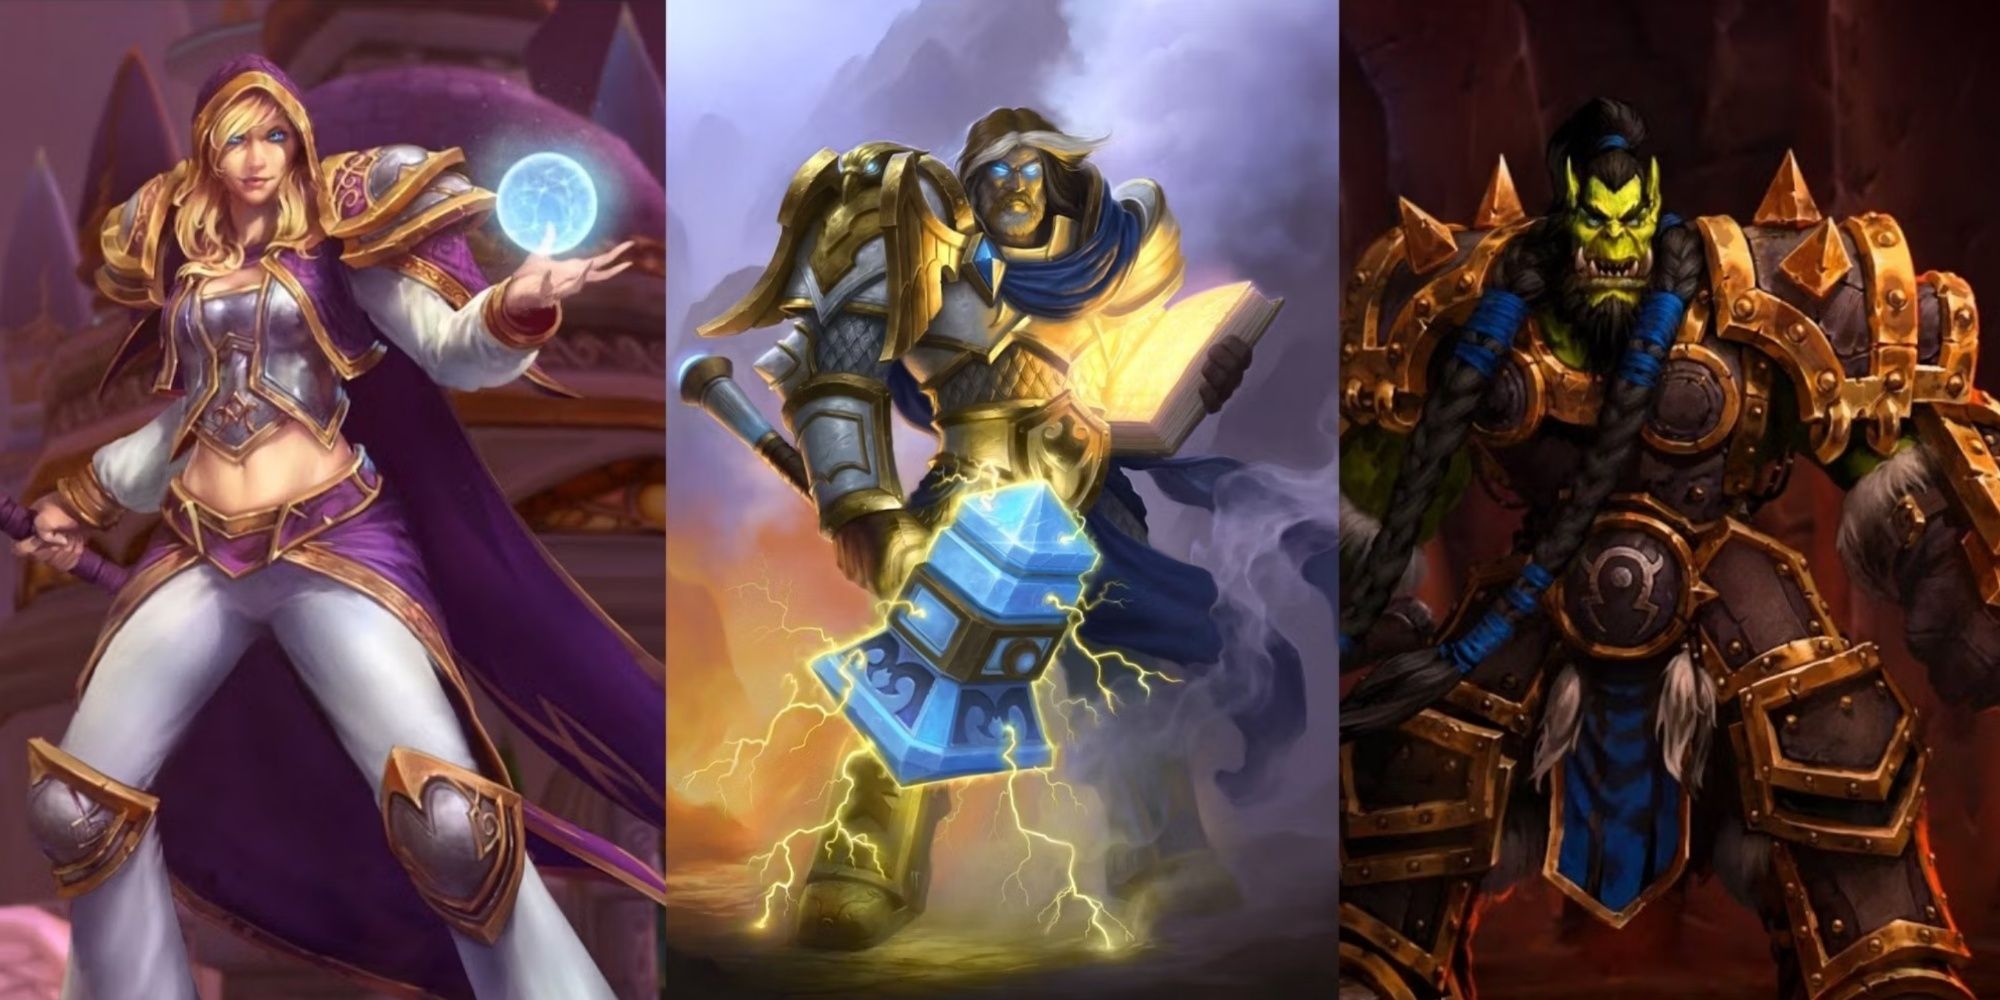 Jaina, Uther and Thrall from World of Warcraft Season of Discovery